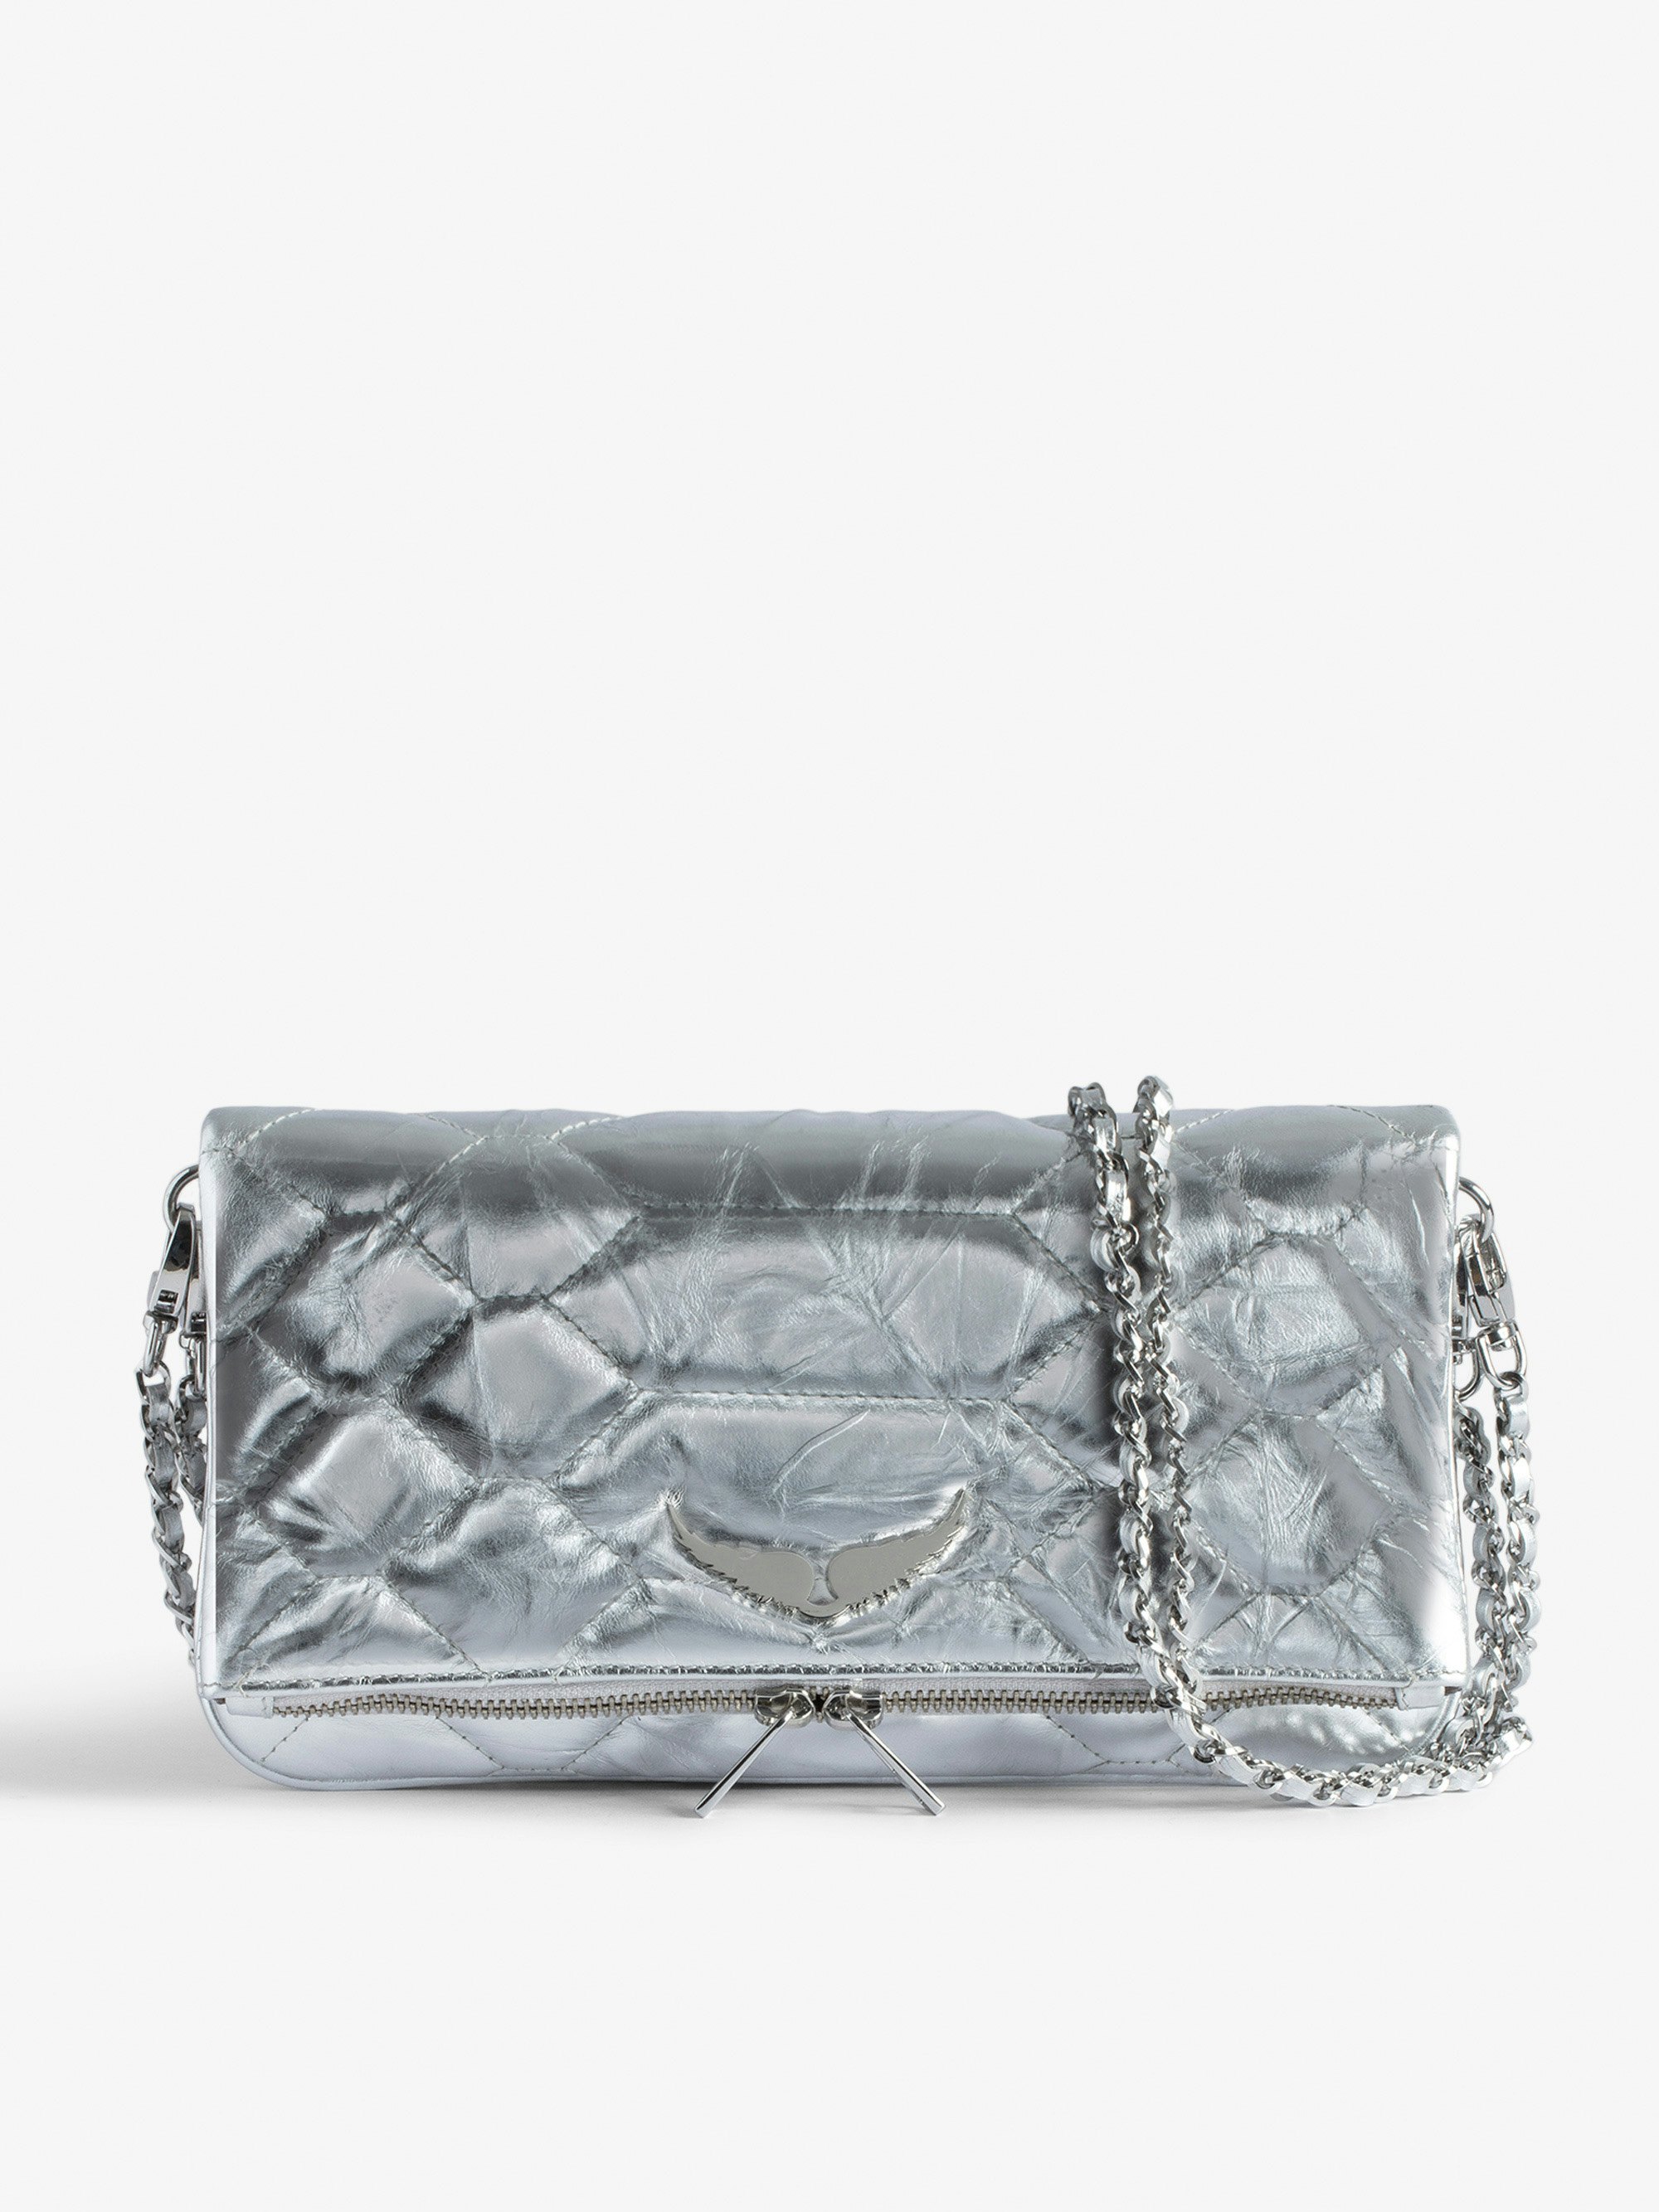 Rock Quilted Metallic Clutch - Rock silver snakeskin-effect metallic, crinkled, quilted leather clutch with double leather and metal chain.